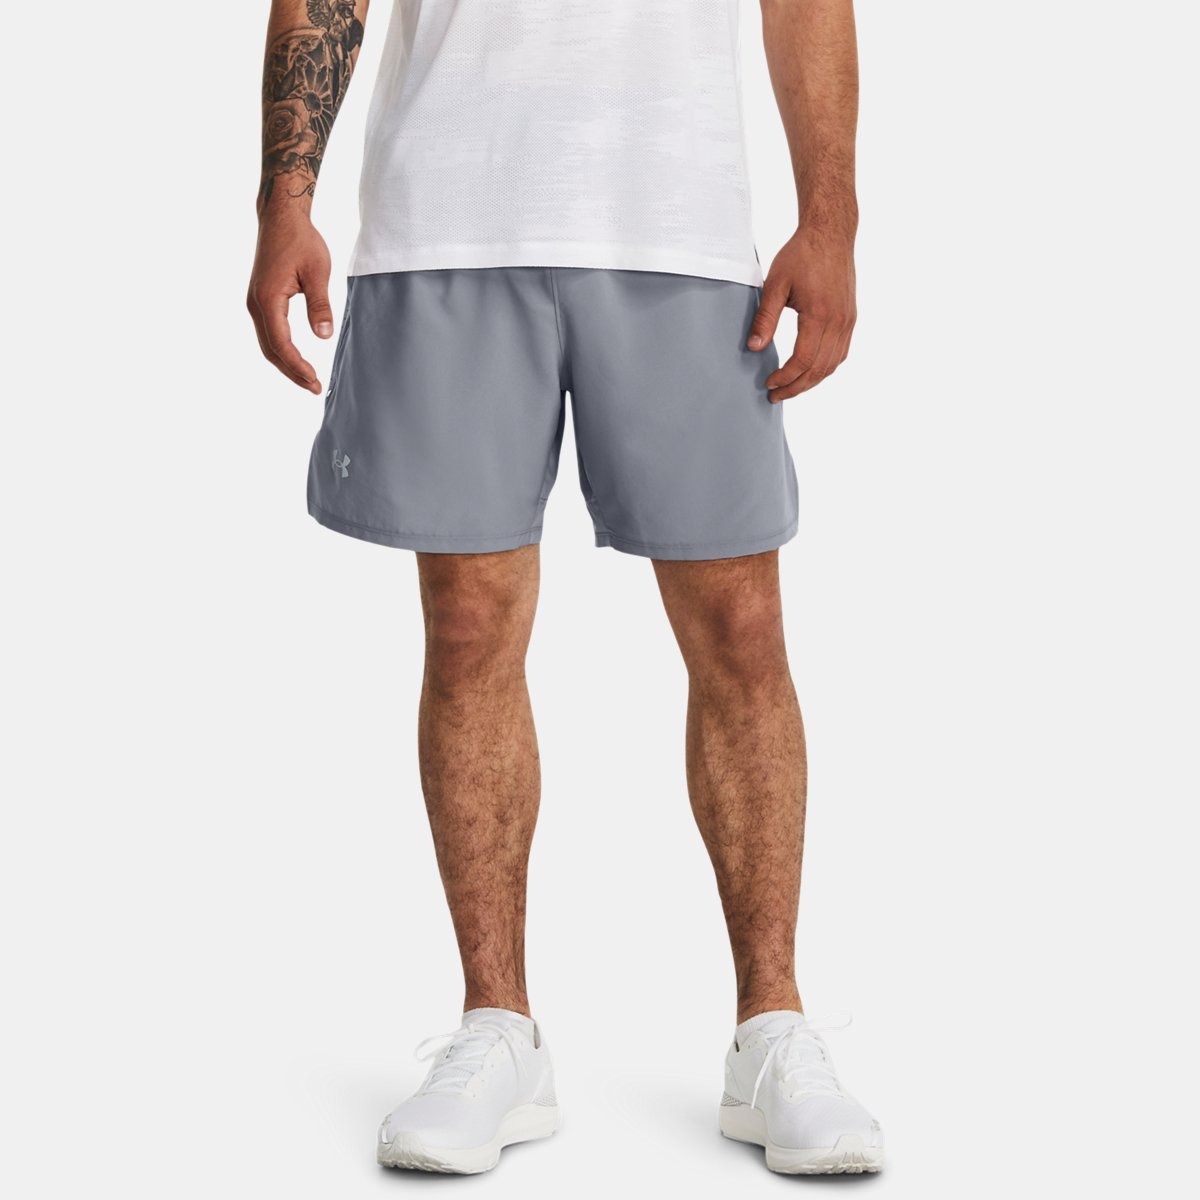 Shorts in Grey at Under Armour GOOFASH